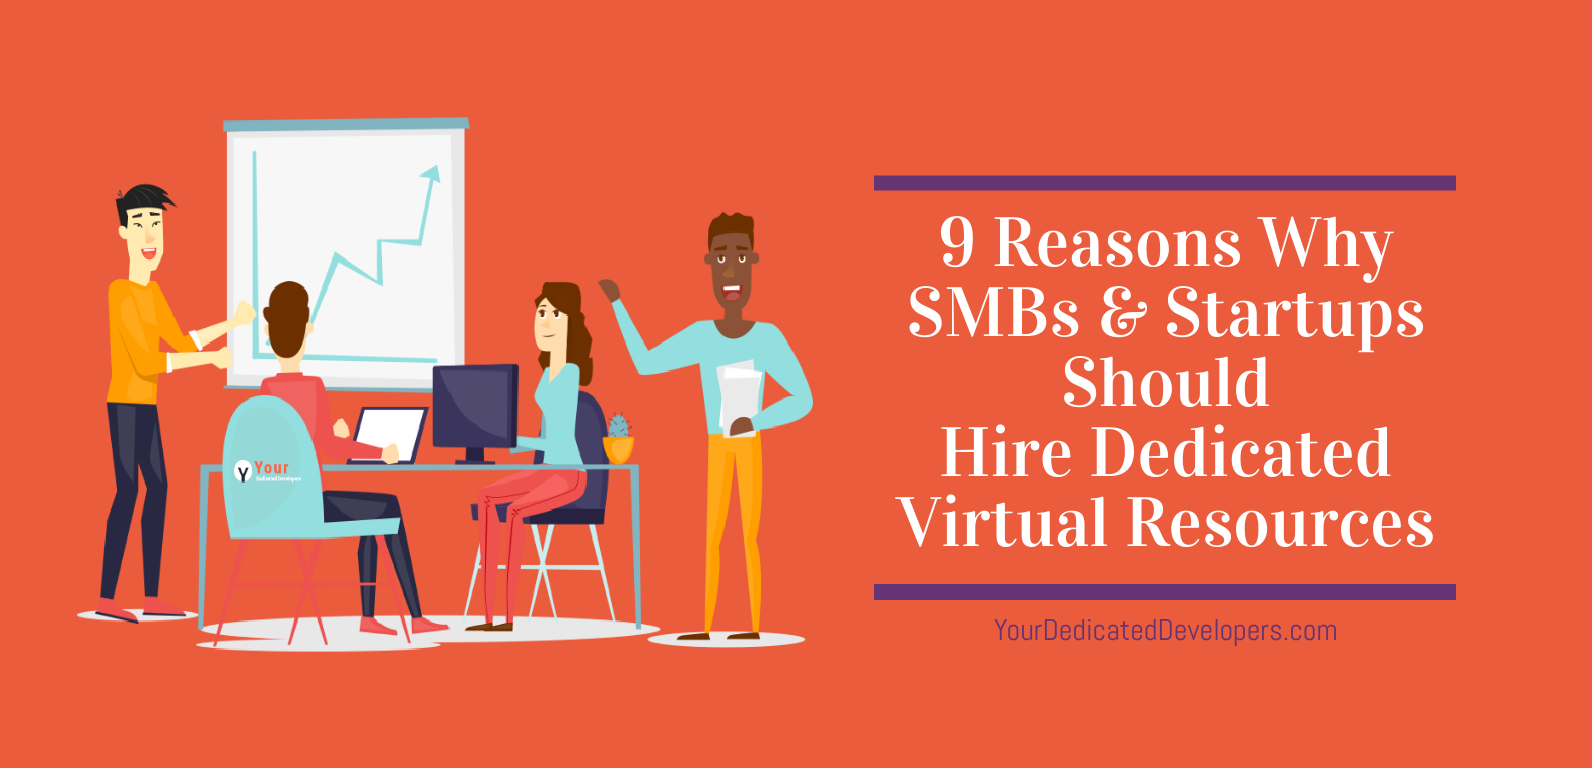 9 Reasons Why SMBs & Startups Should Hire Dedicated Virtual Resources